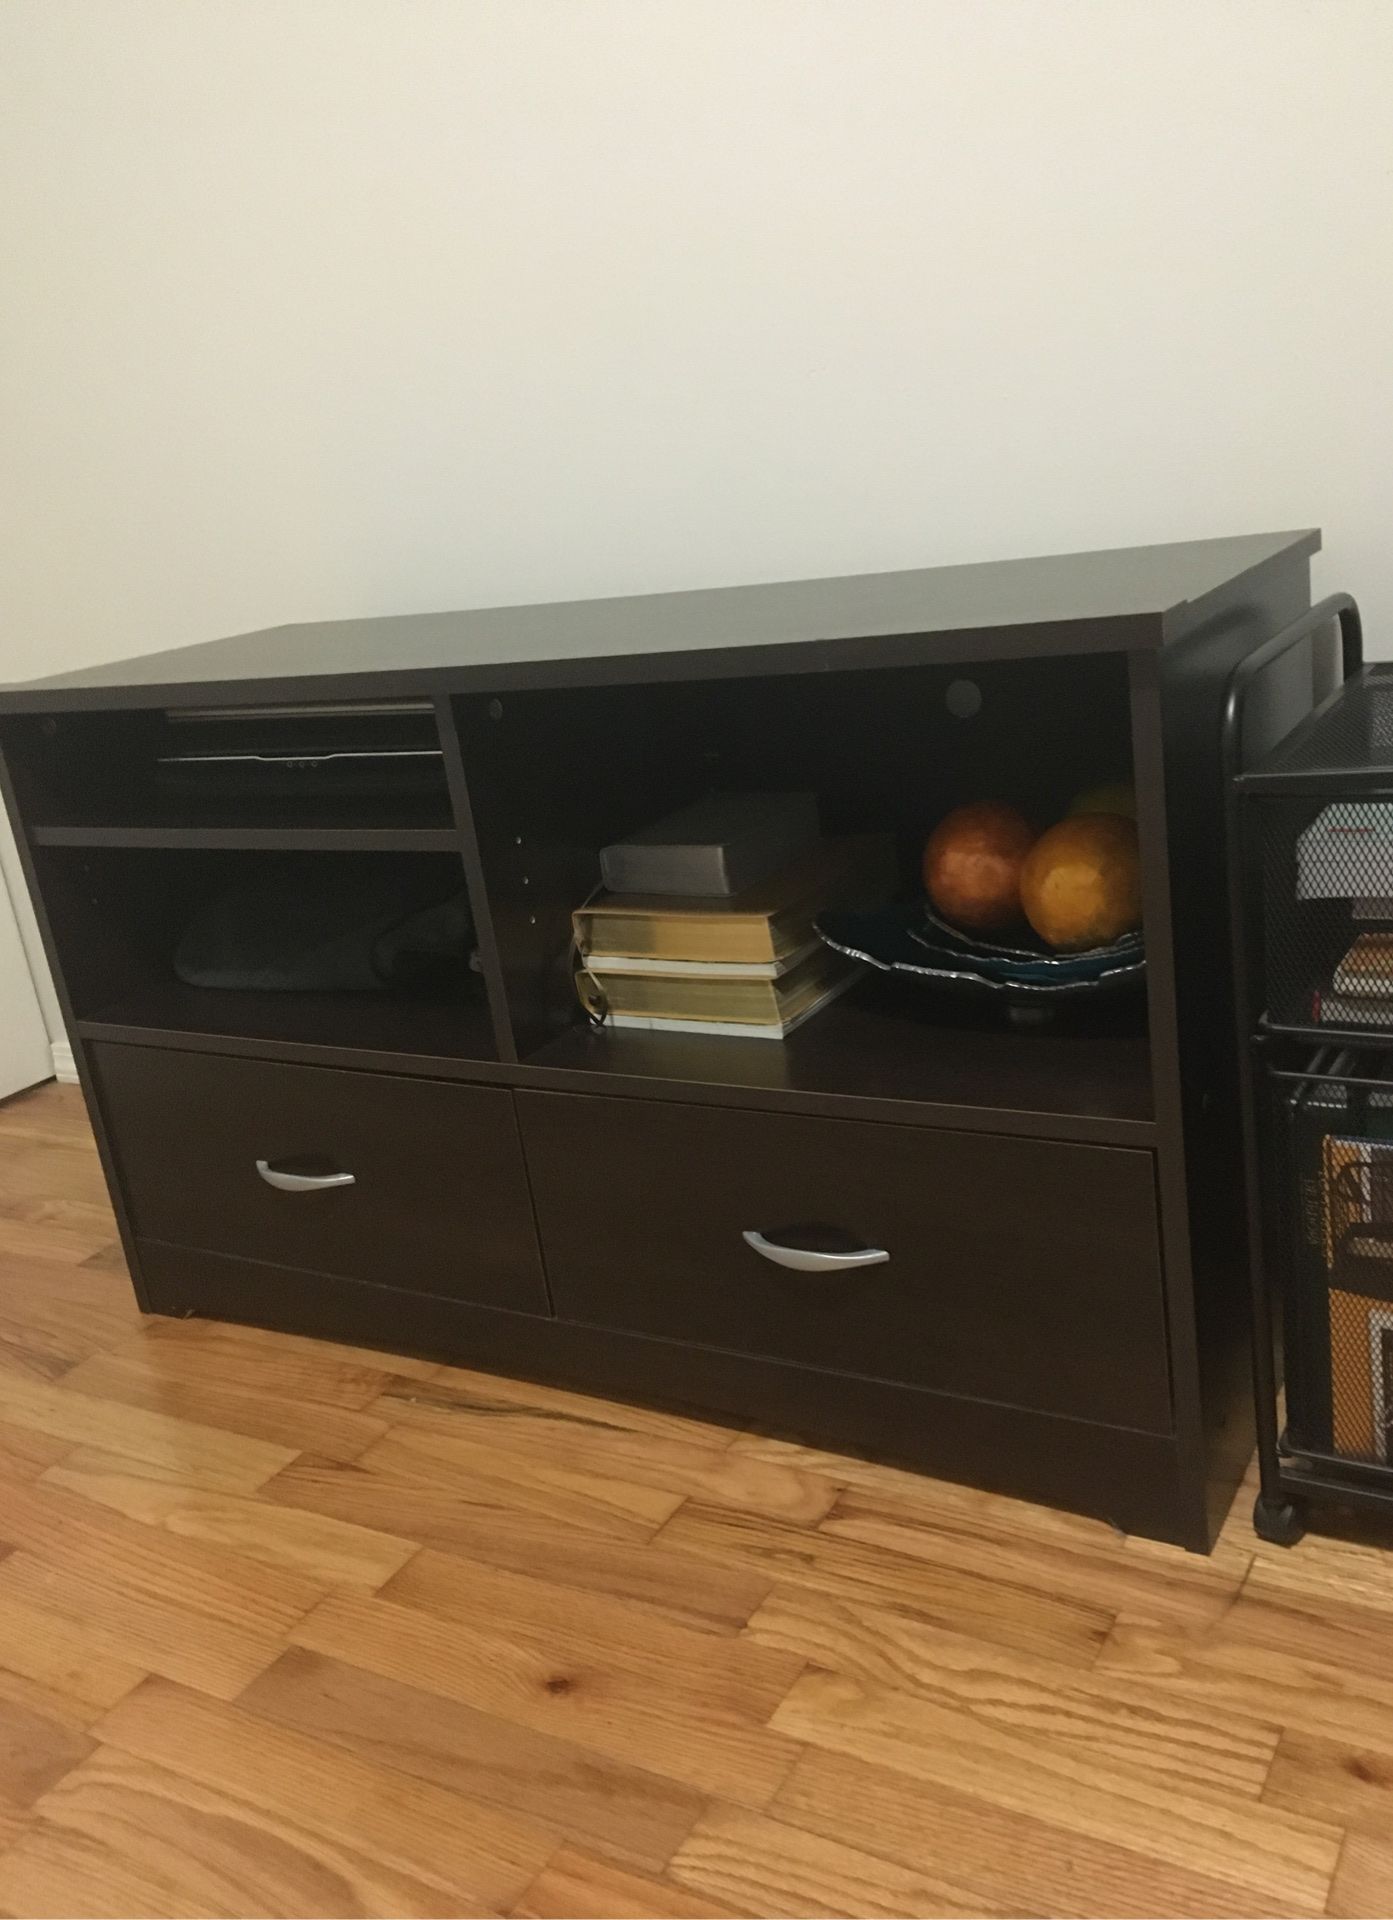 40 in. TV stand/book shelf $60; I can deliver